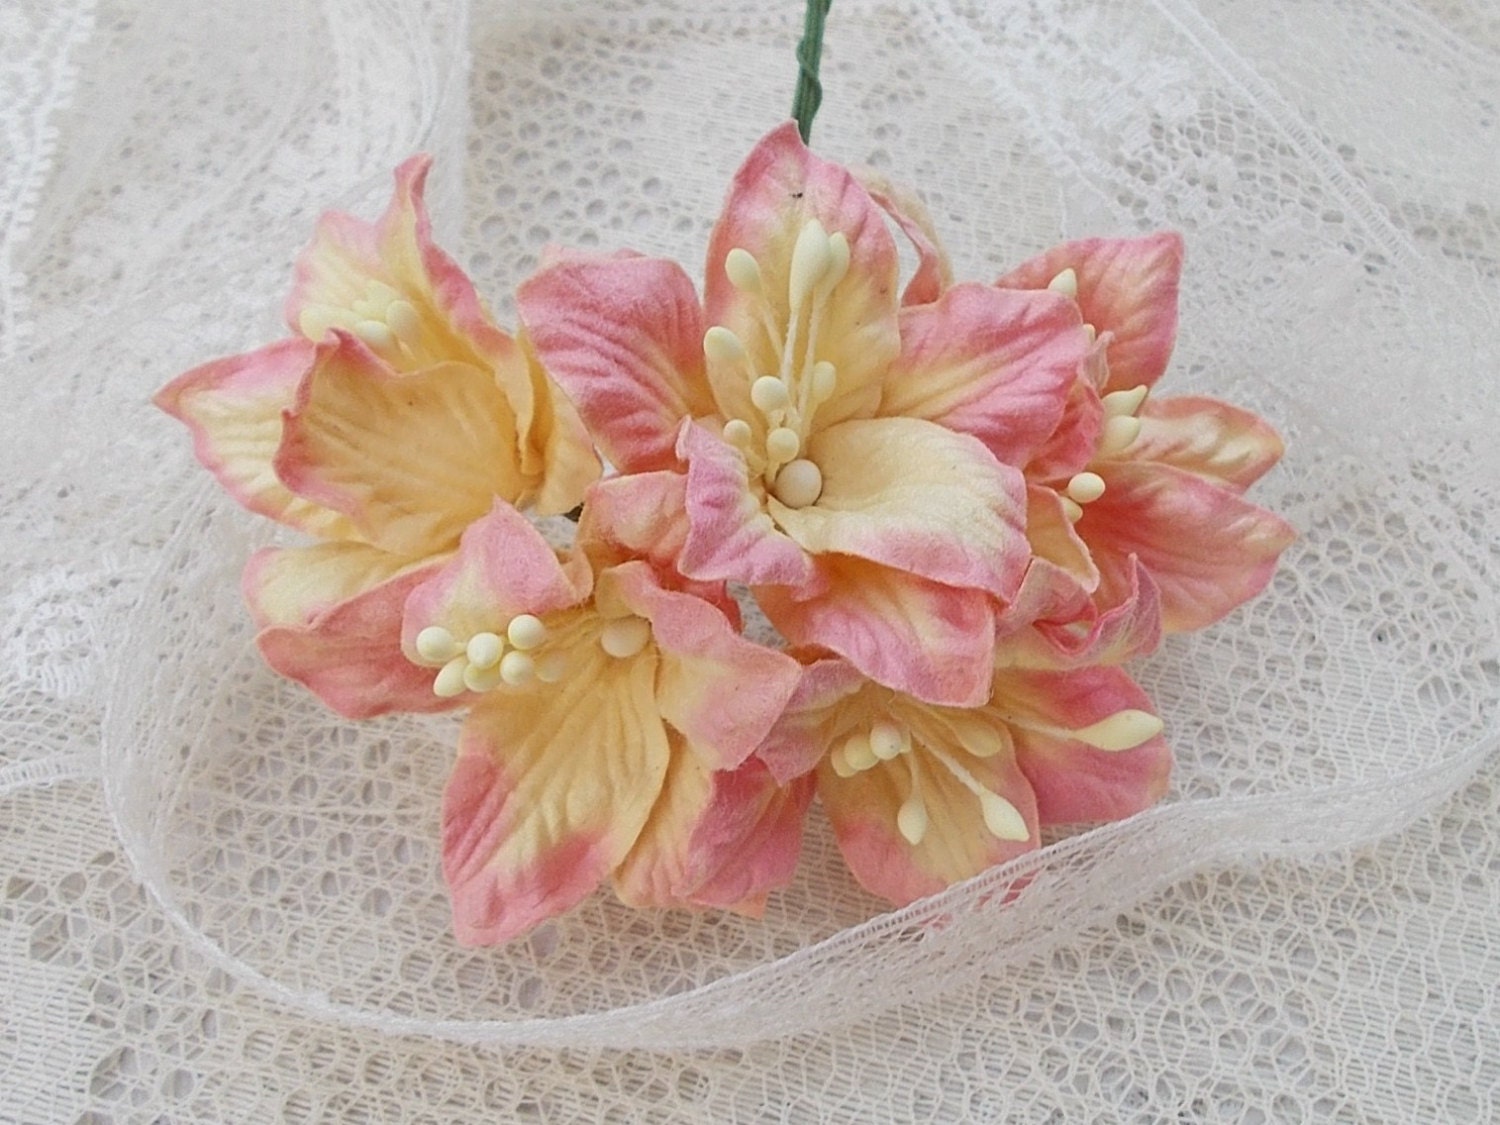 Shabby Chic Lily Flowers for Scrapbooking, Card Making, Altered Art, Tags, Mixed Media, Wedding, Cream and Pink